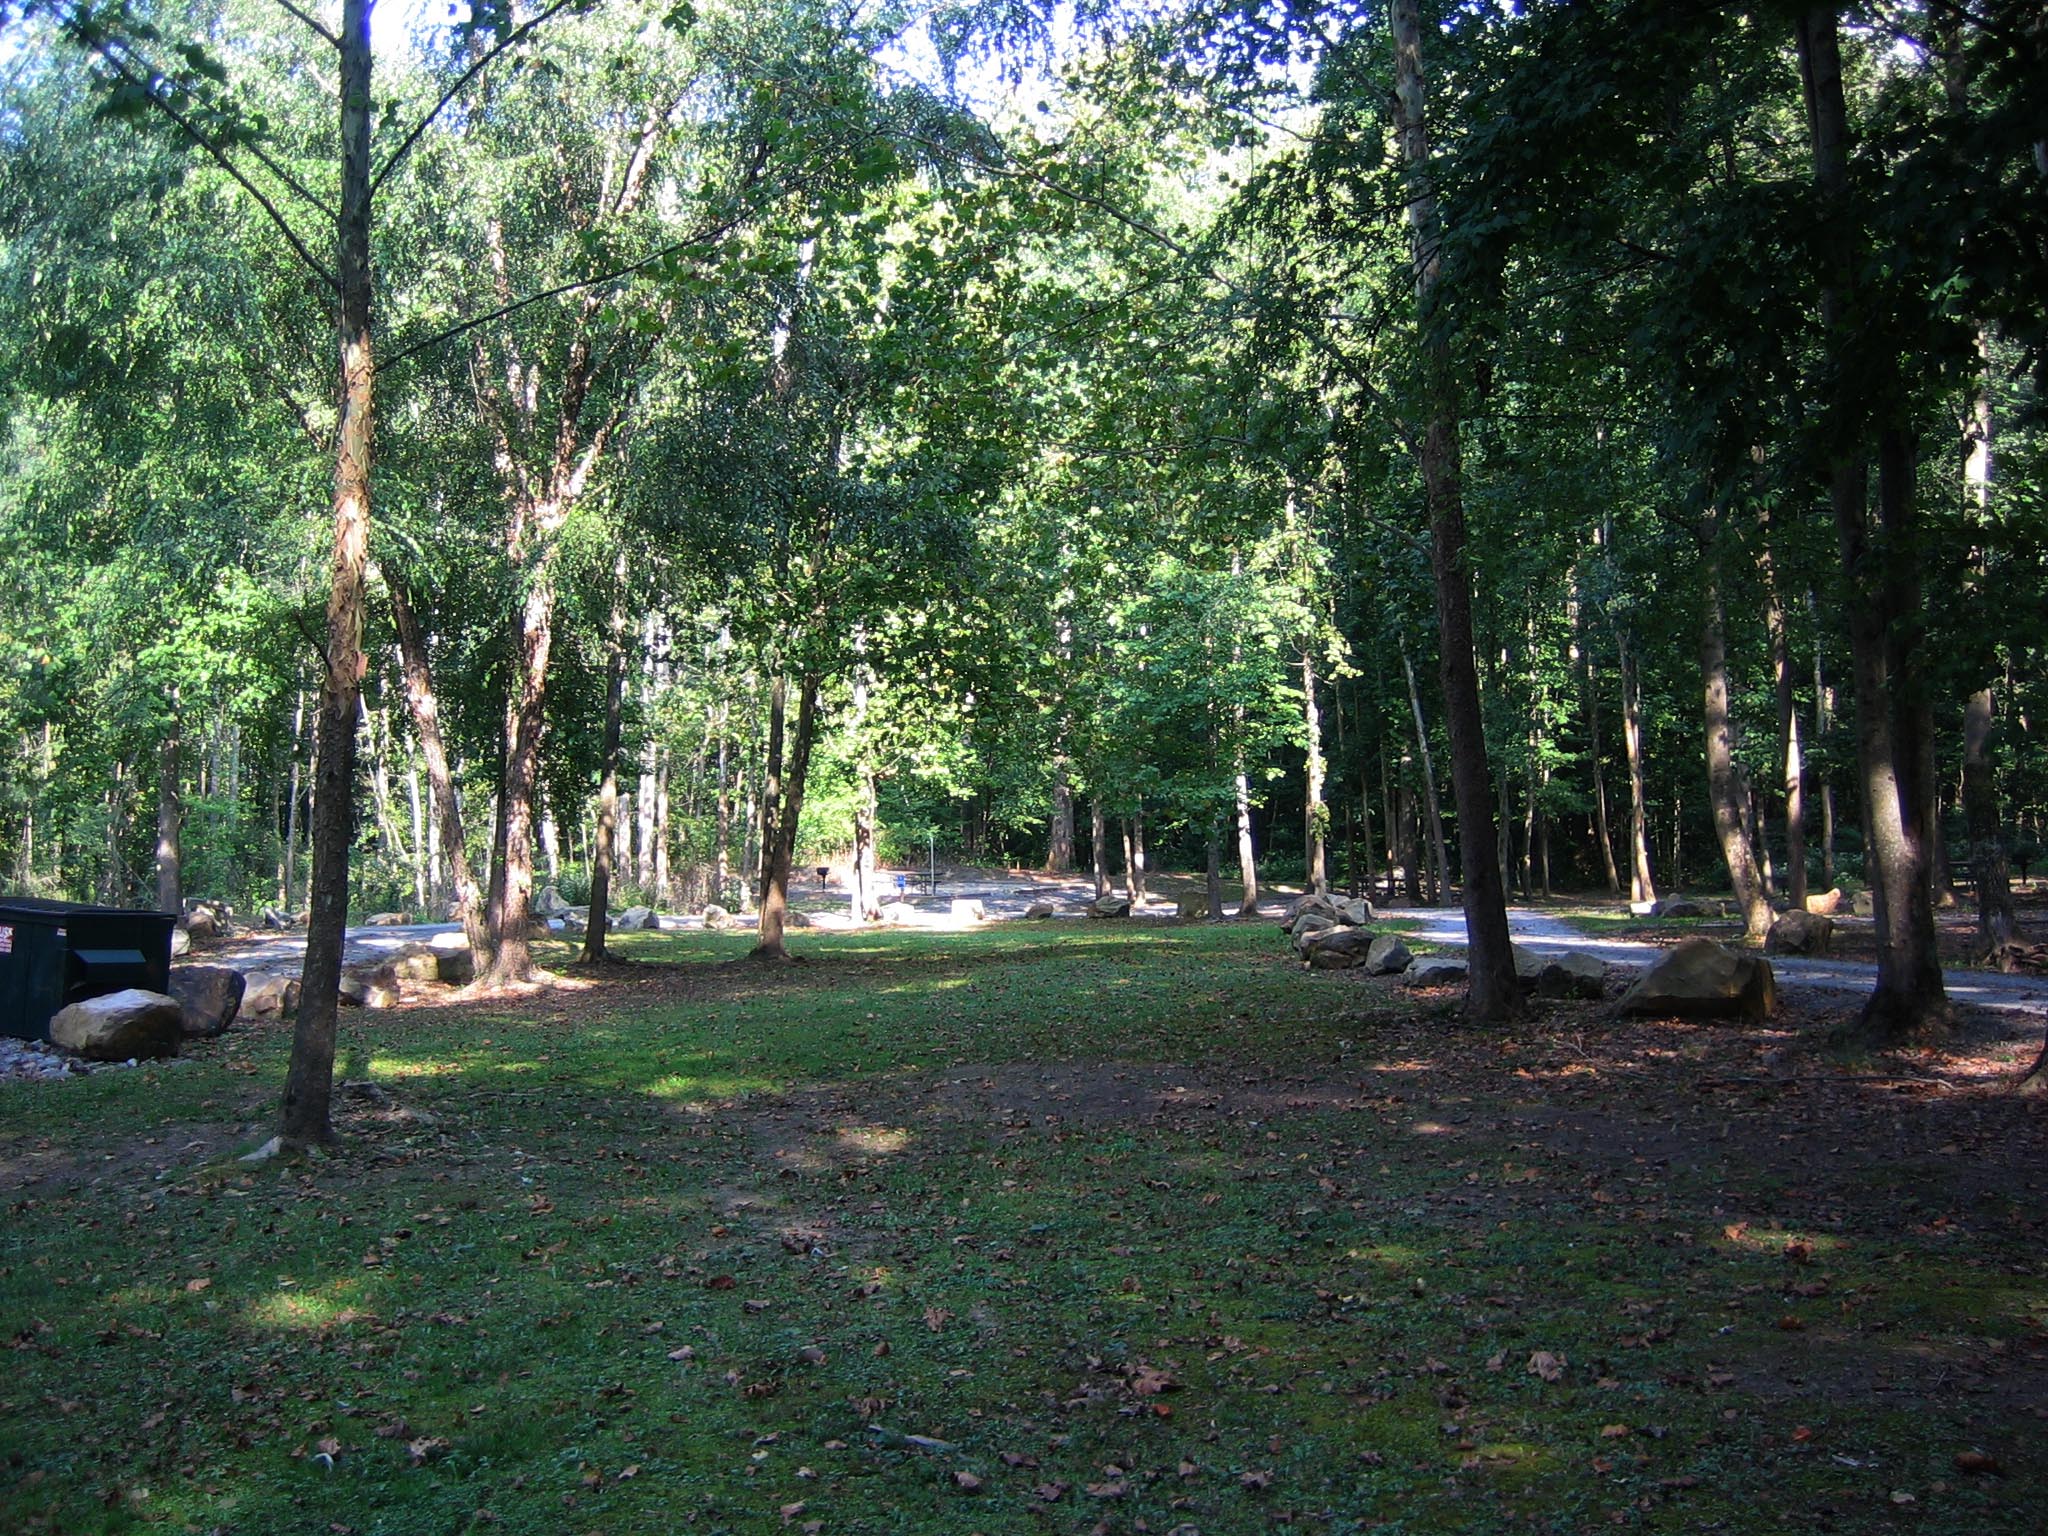 A small grassy area covered in trees with a road around it and designated campsites.